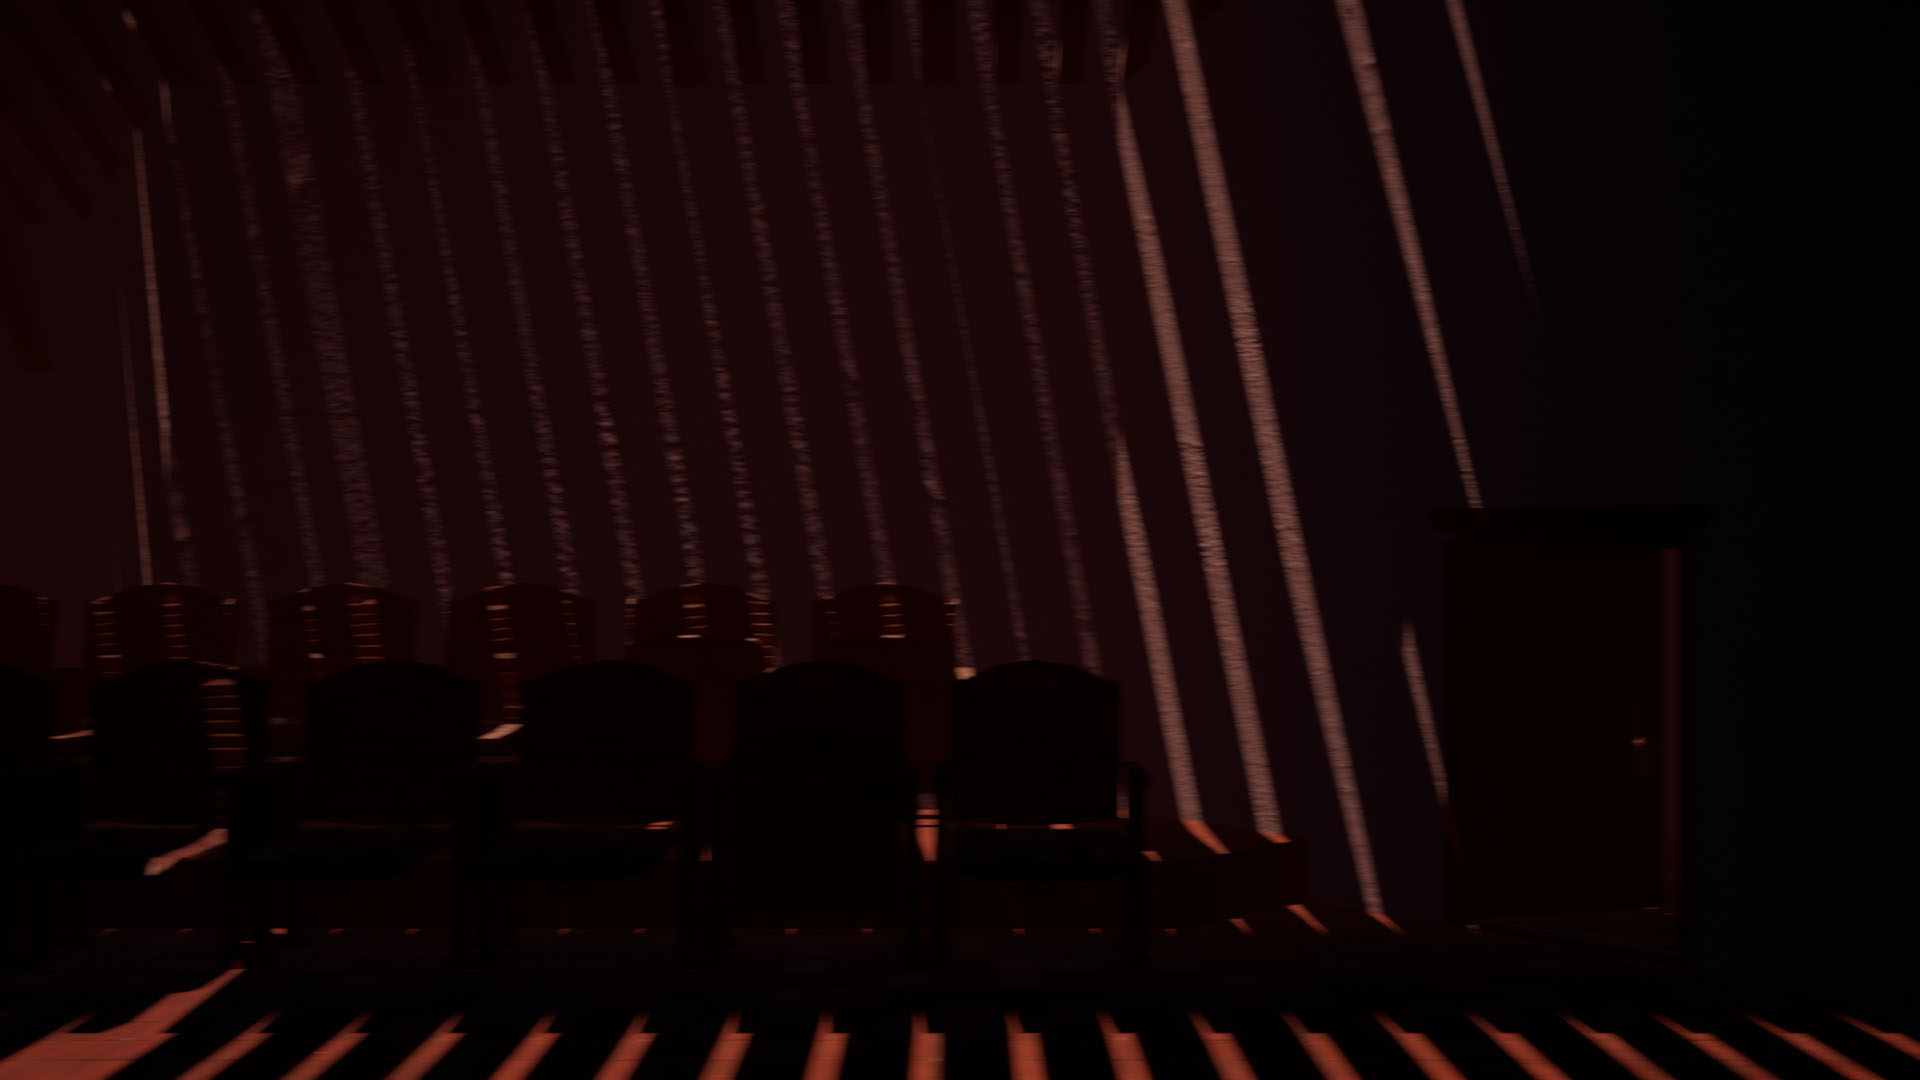 Game screenshot showing chairs arranged in a room with dramatic lighting and shadows cast from the ceiling.